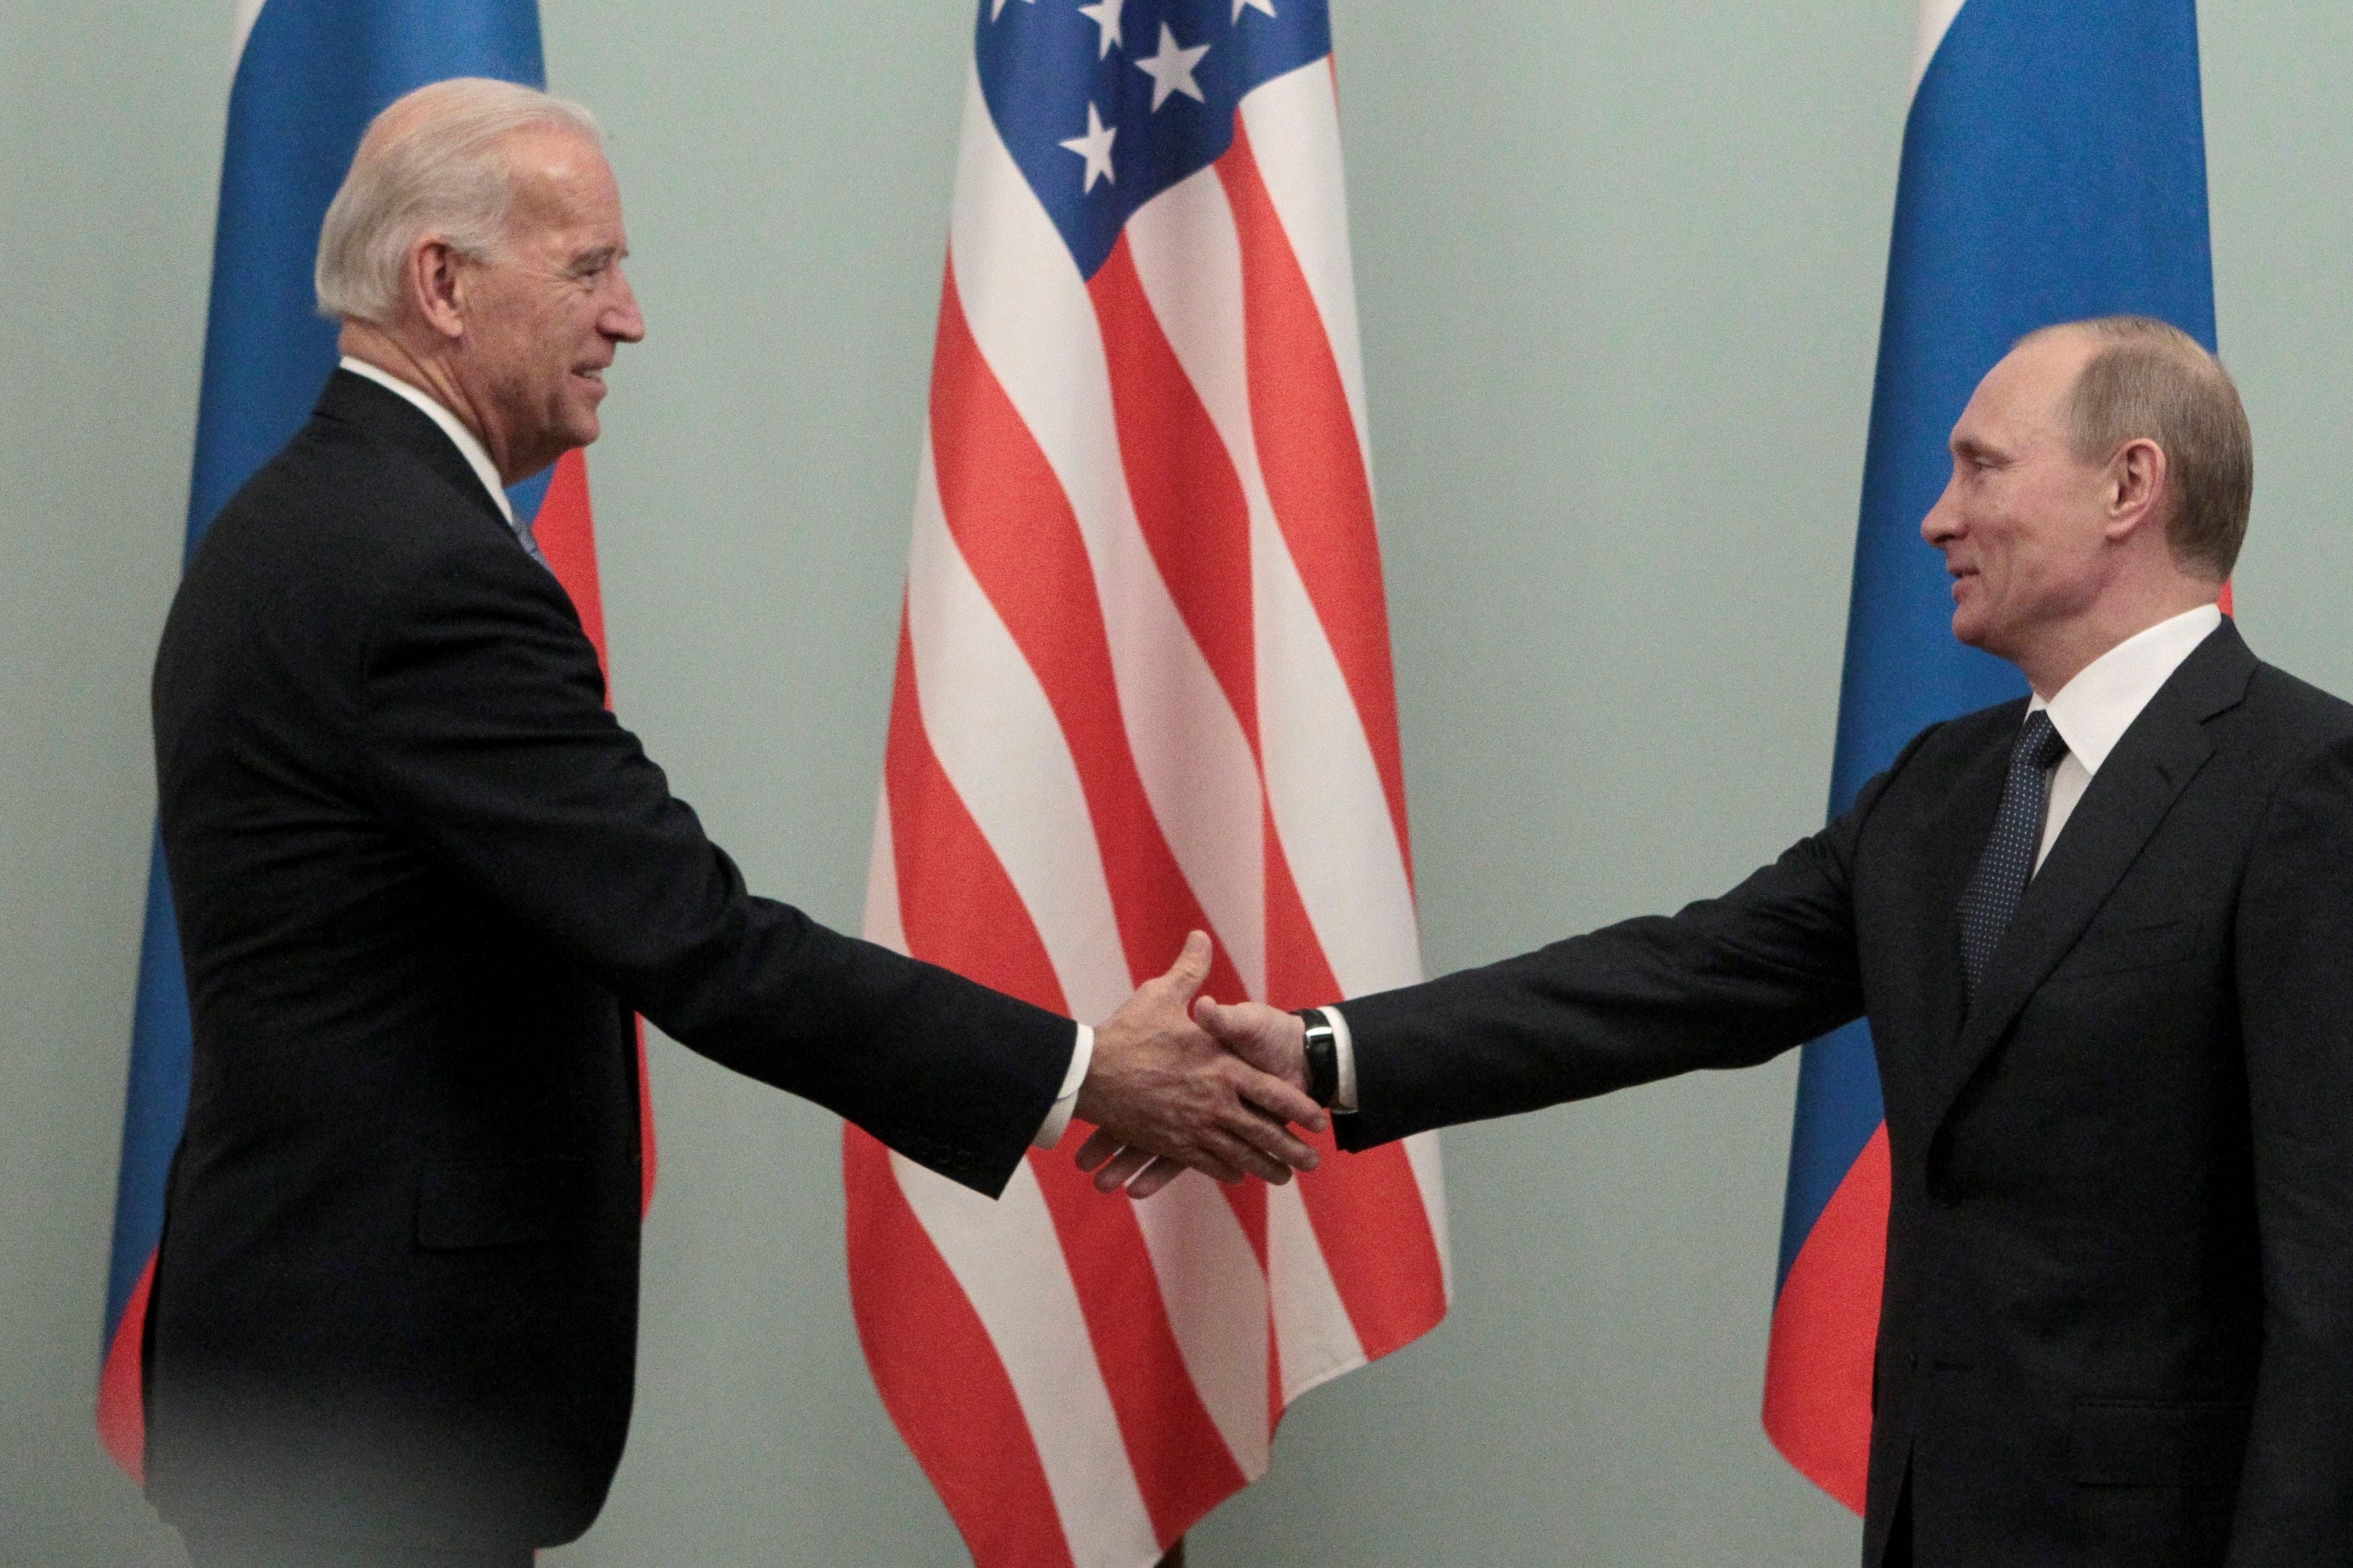 Biden and Putin smile and shake hands in front of American and Russian flags.